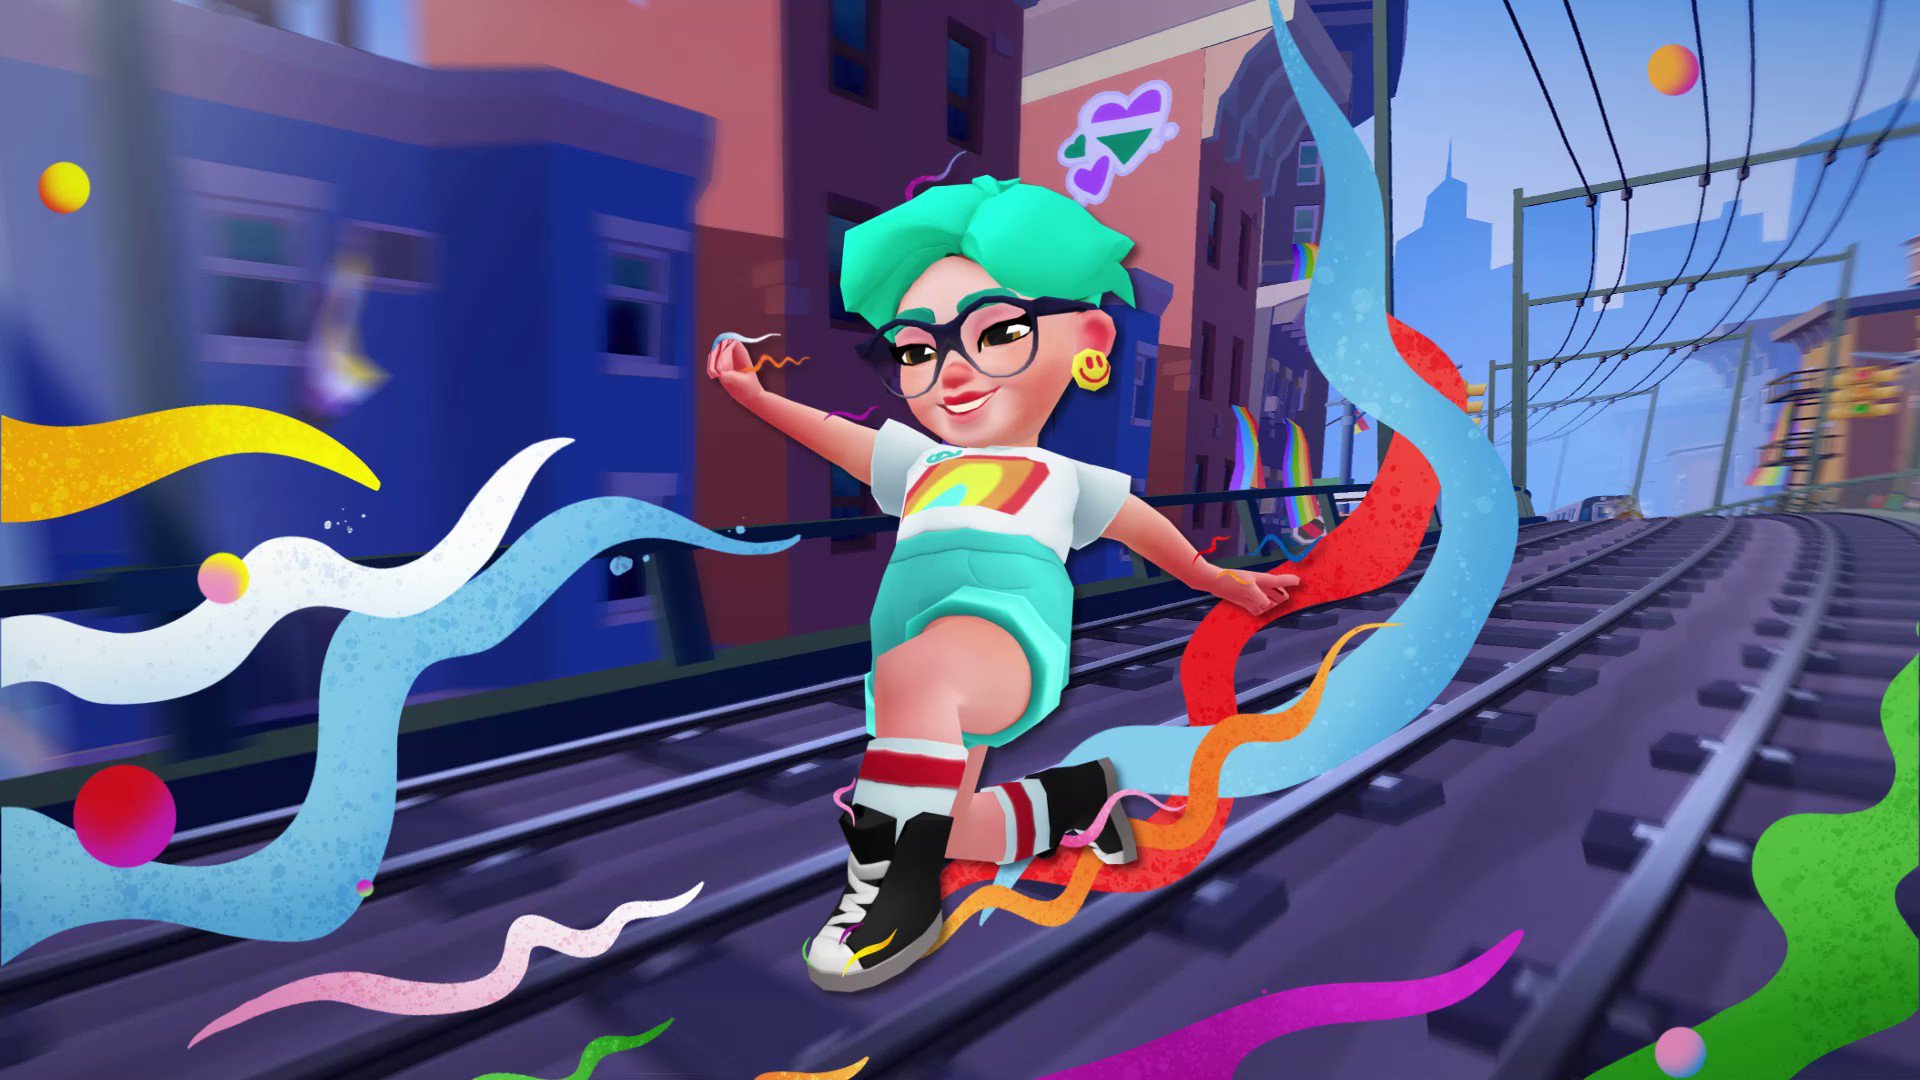 Subway Surfers - New outta this world surfers and outfits!